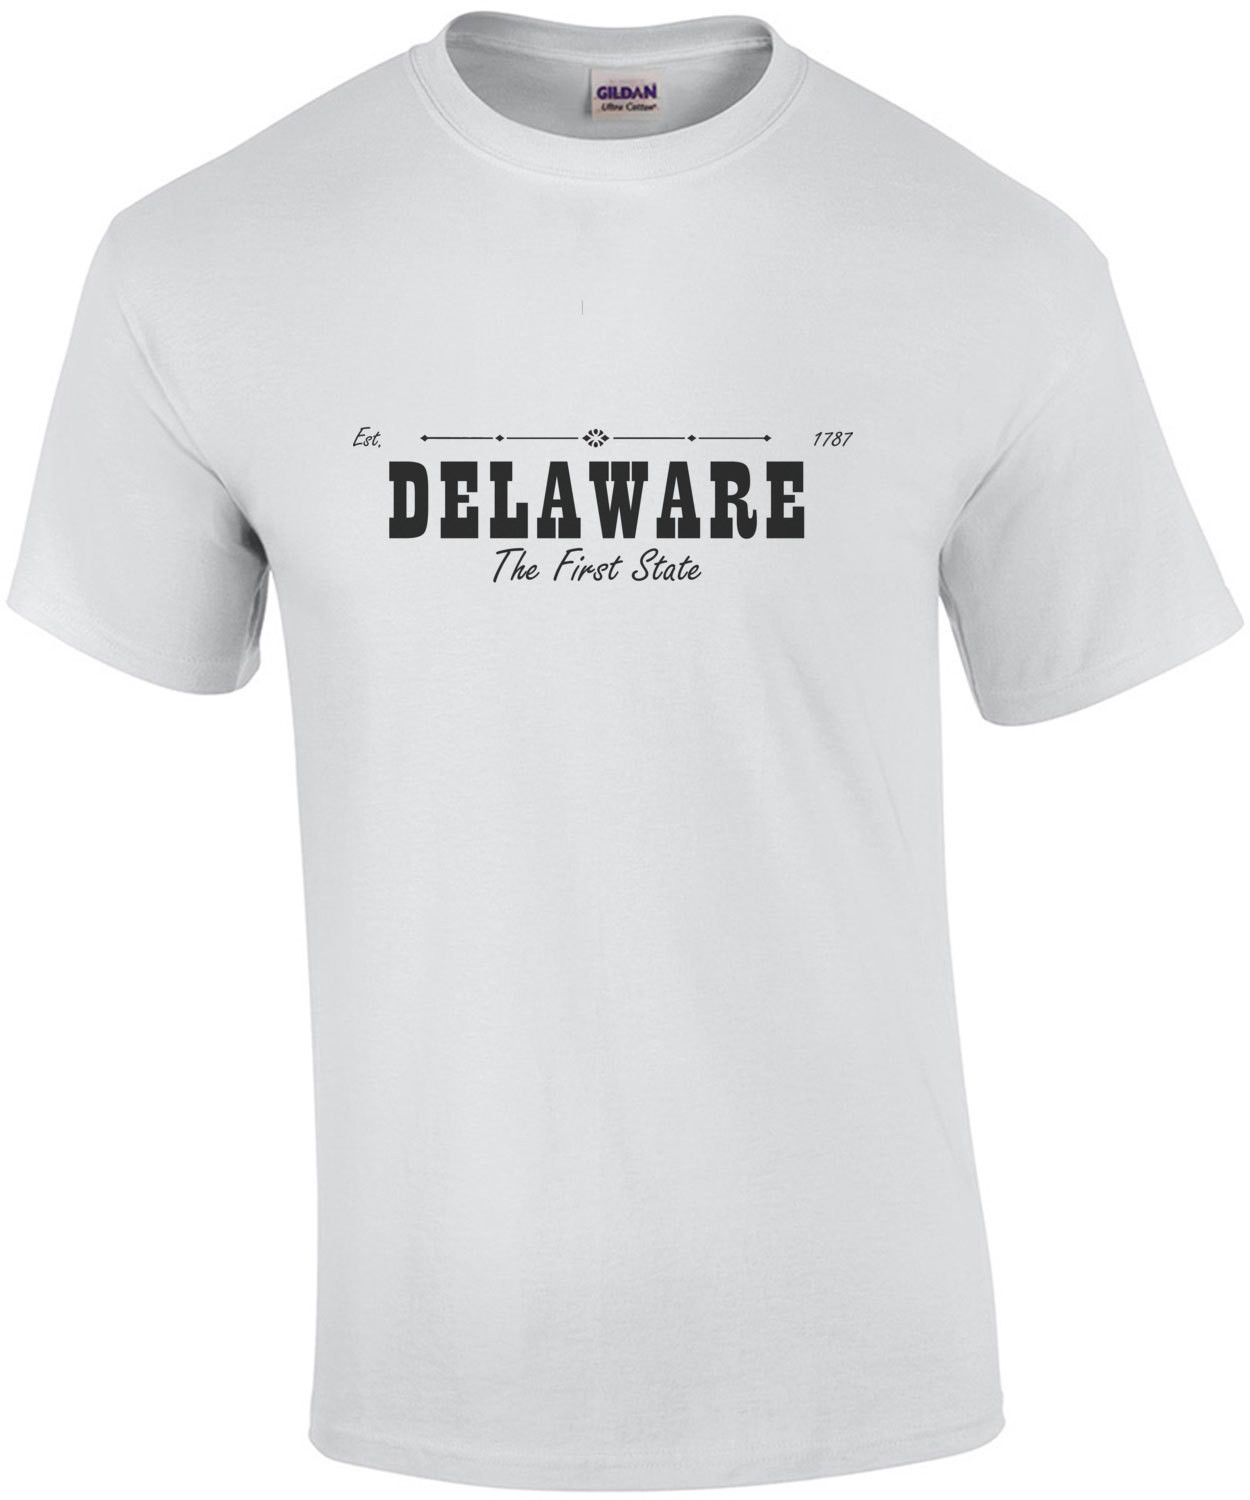 Delaware - The First State Est. 1787 - Delaware T-Shirt